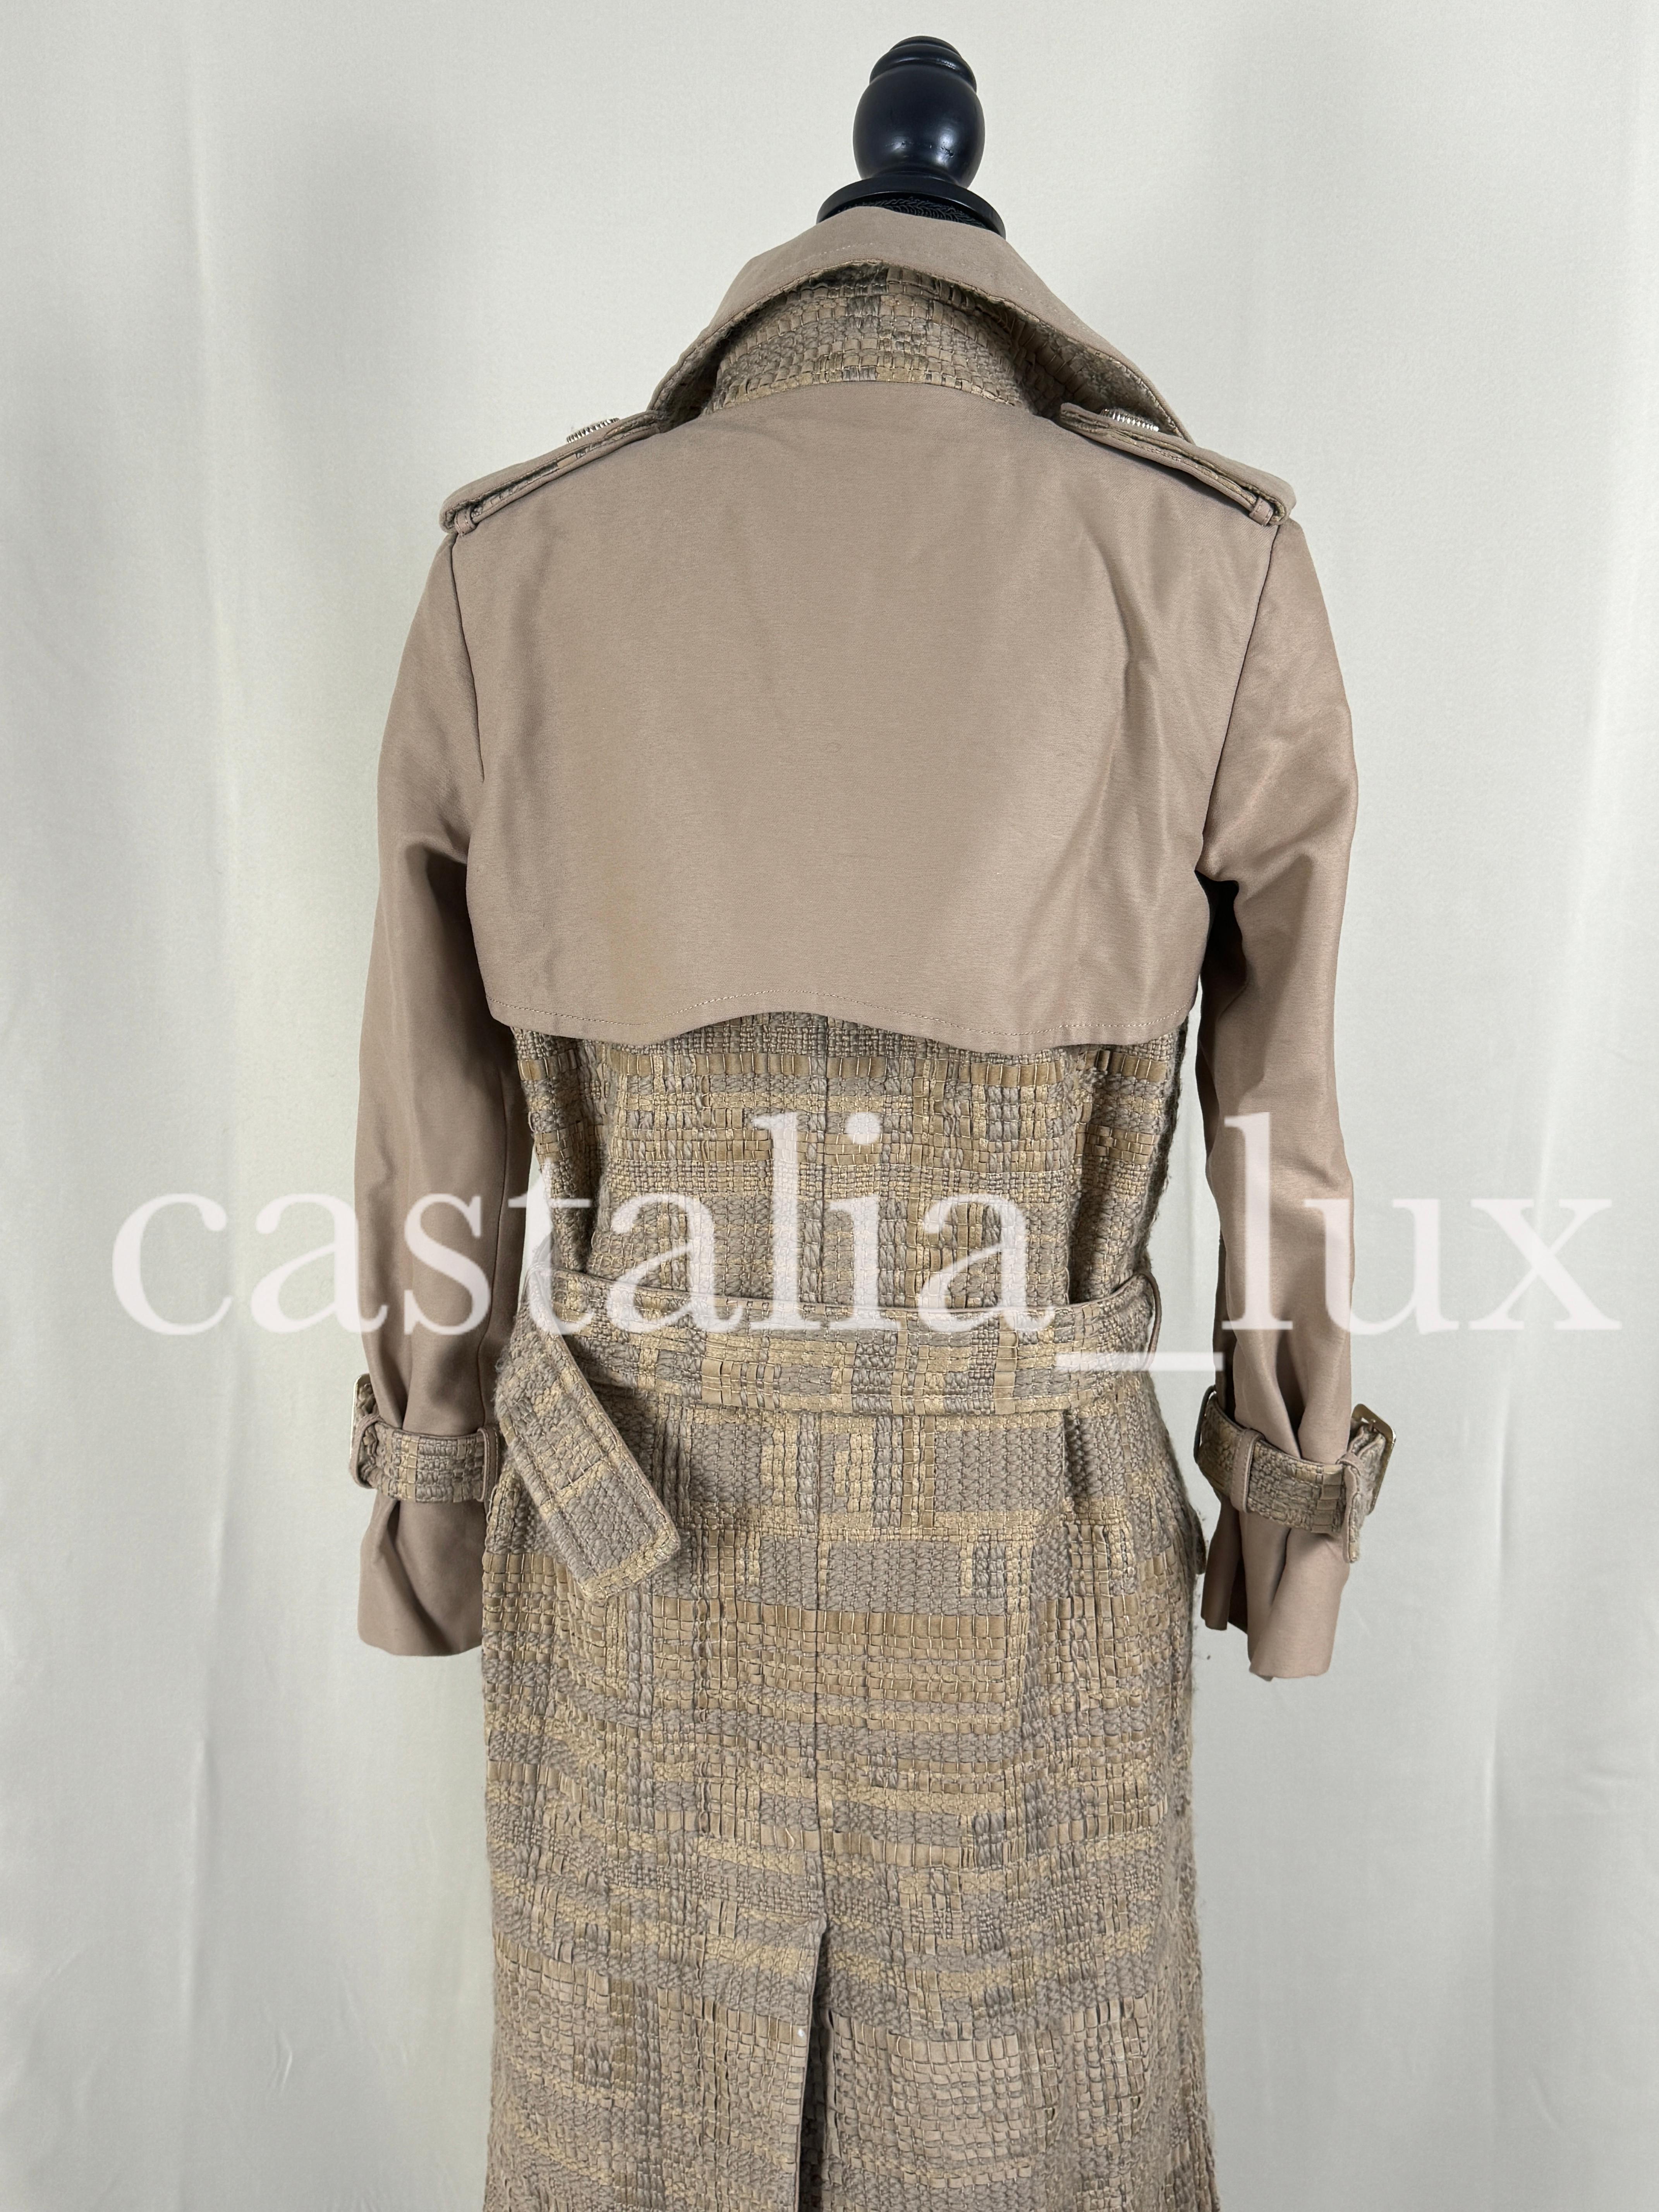 Chanel Iconic Billboards Ribbon Tweed Trench Coat For Sale 12